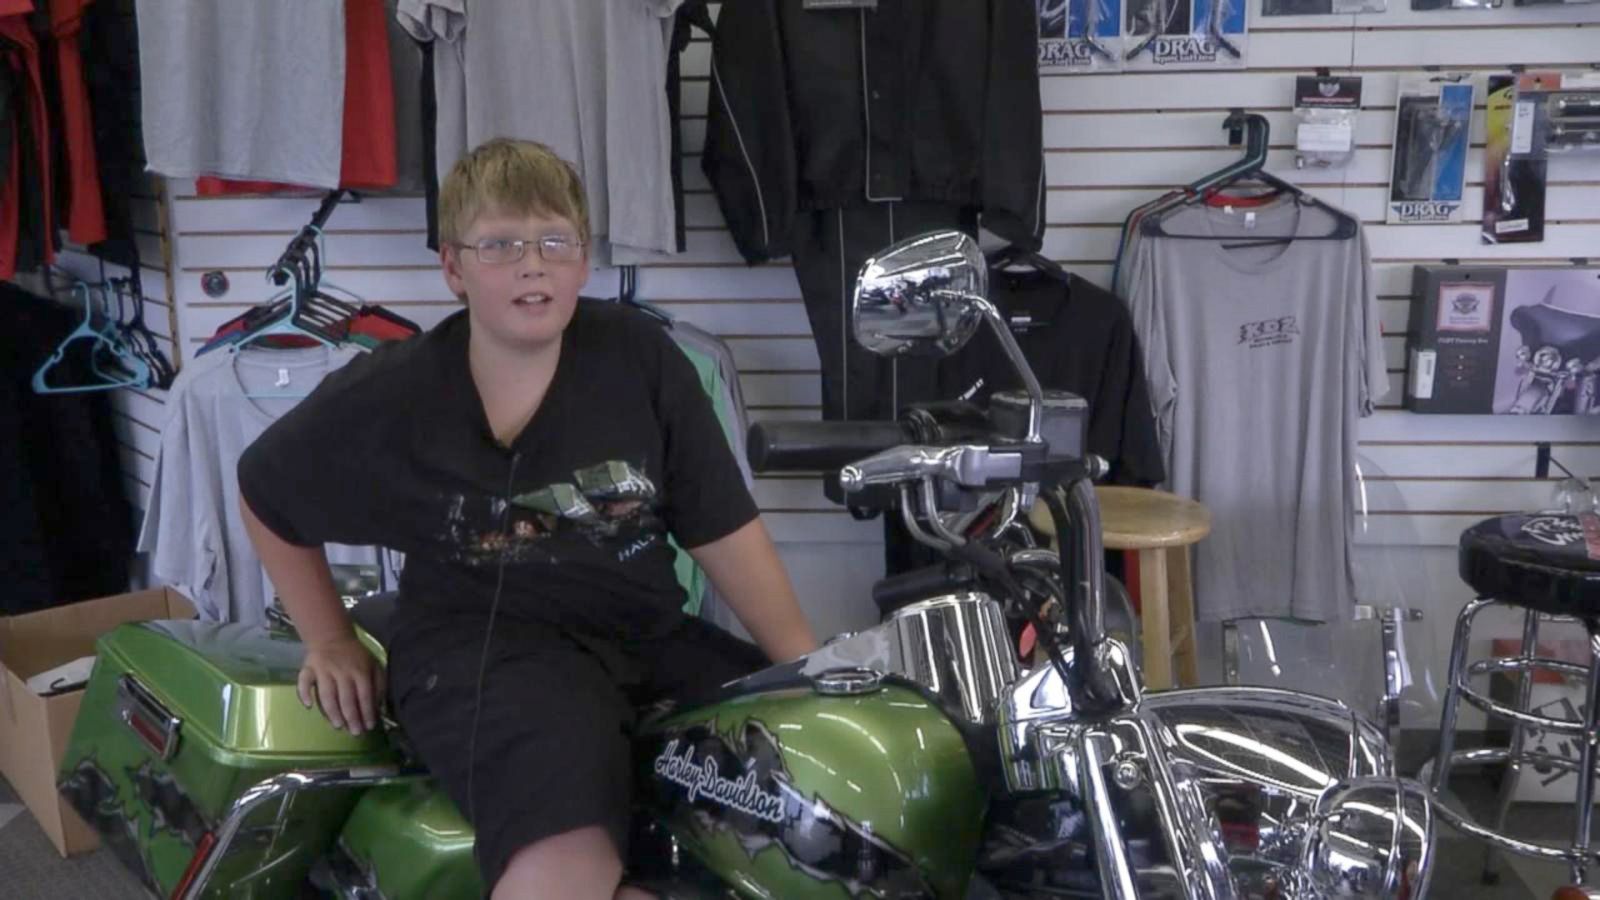 Phil sitting on a green chopper motorcycle.